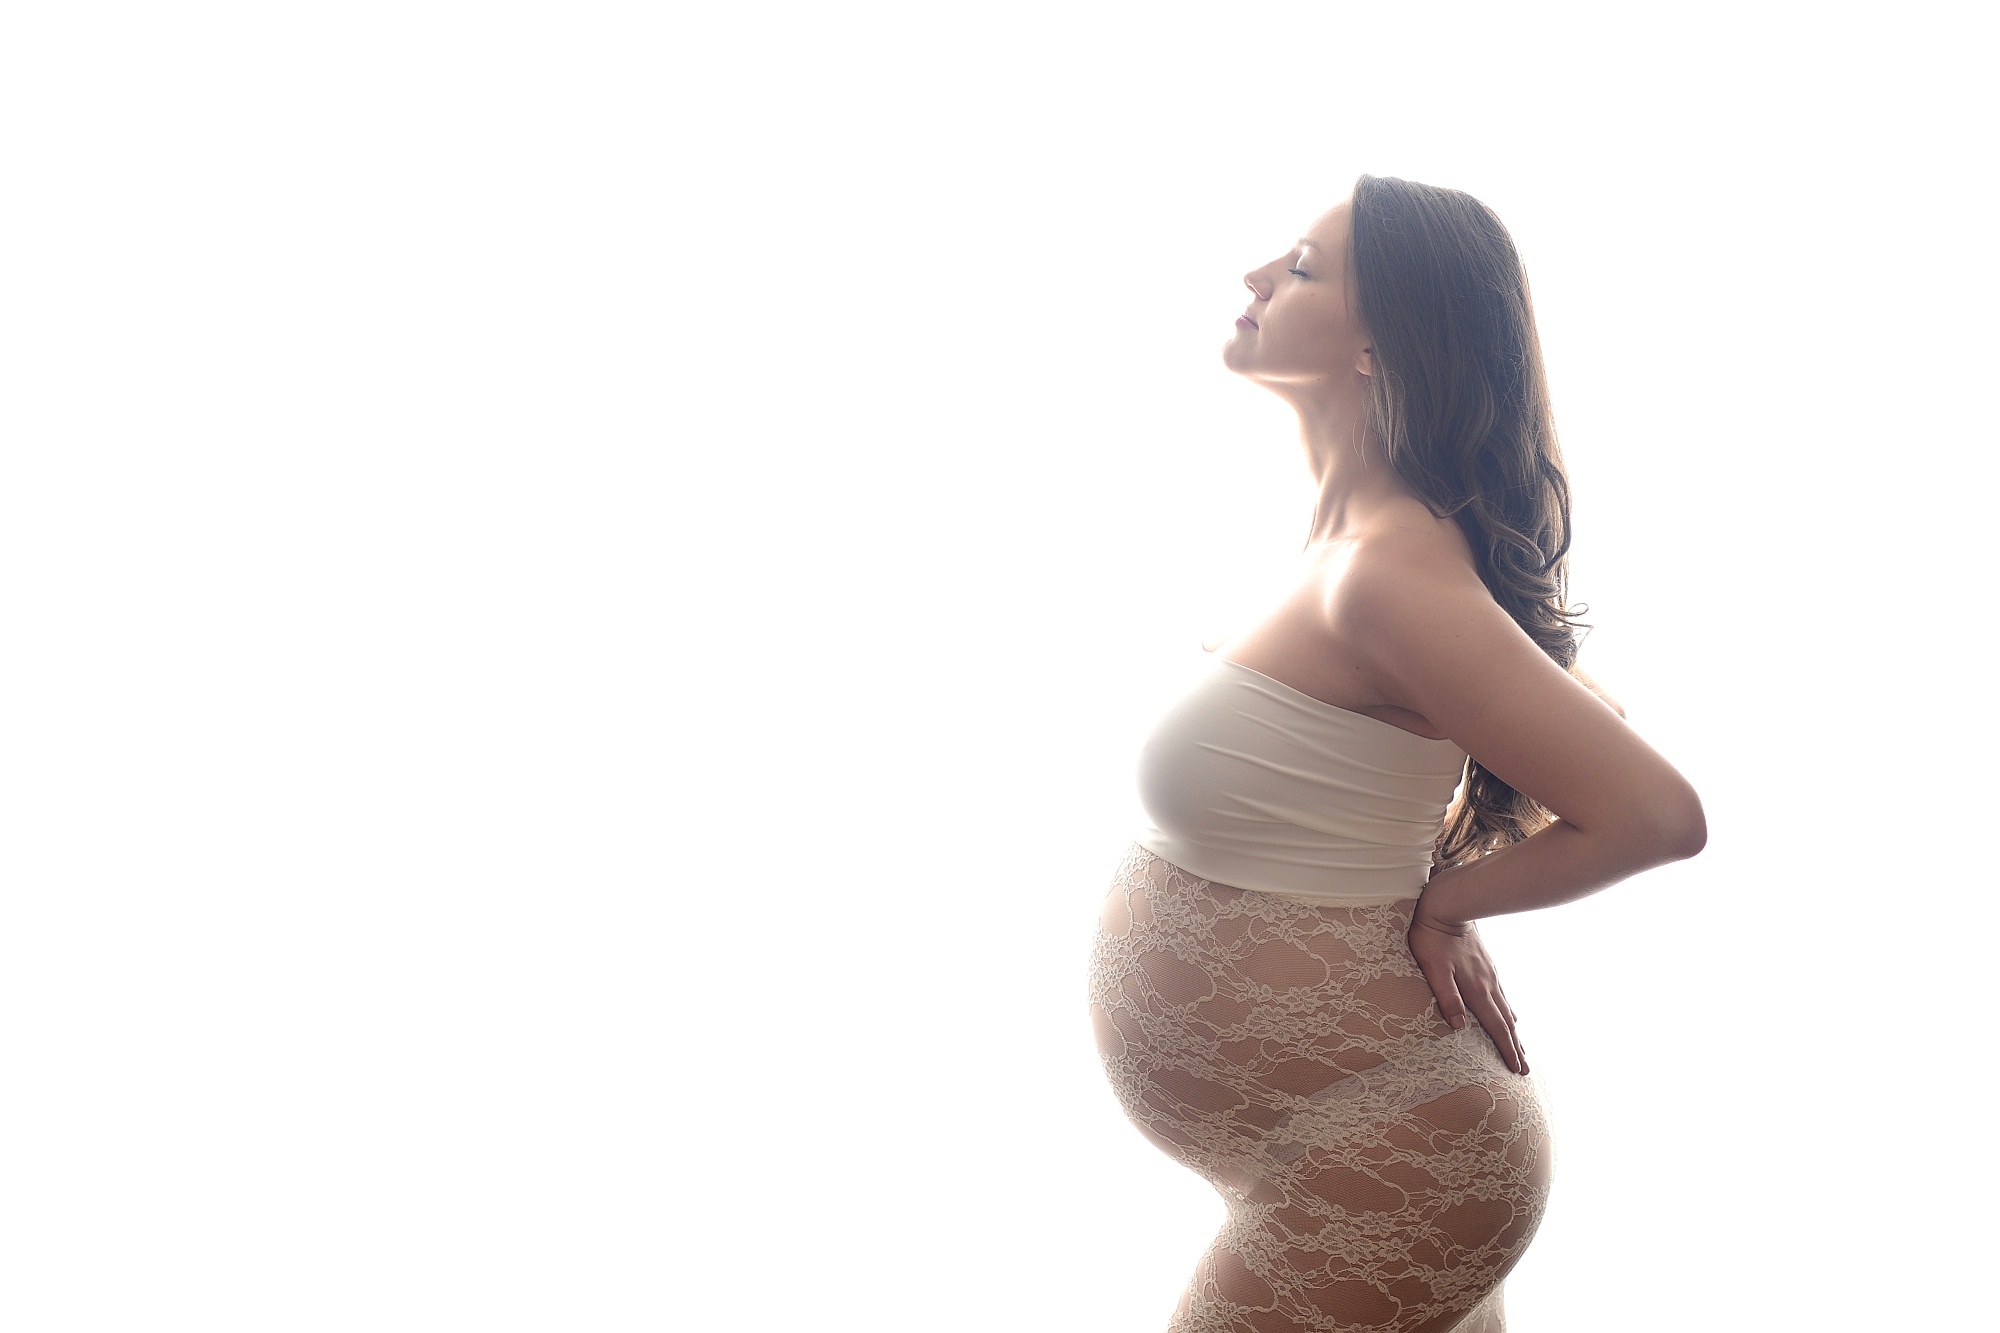  MATERNITY SESSION IN QUEENS